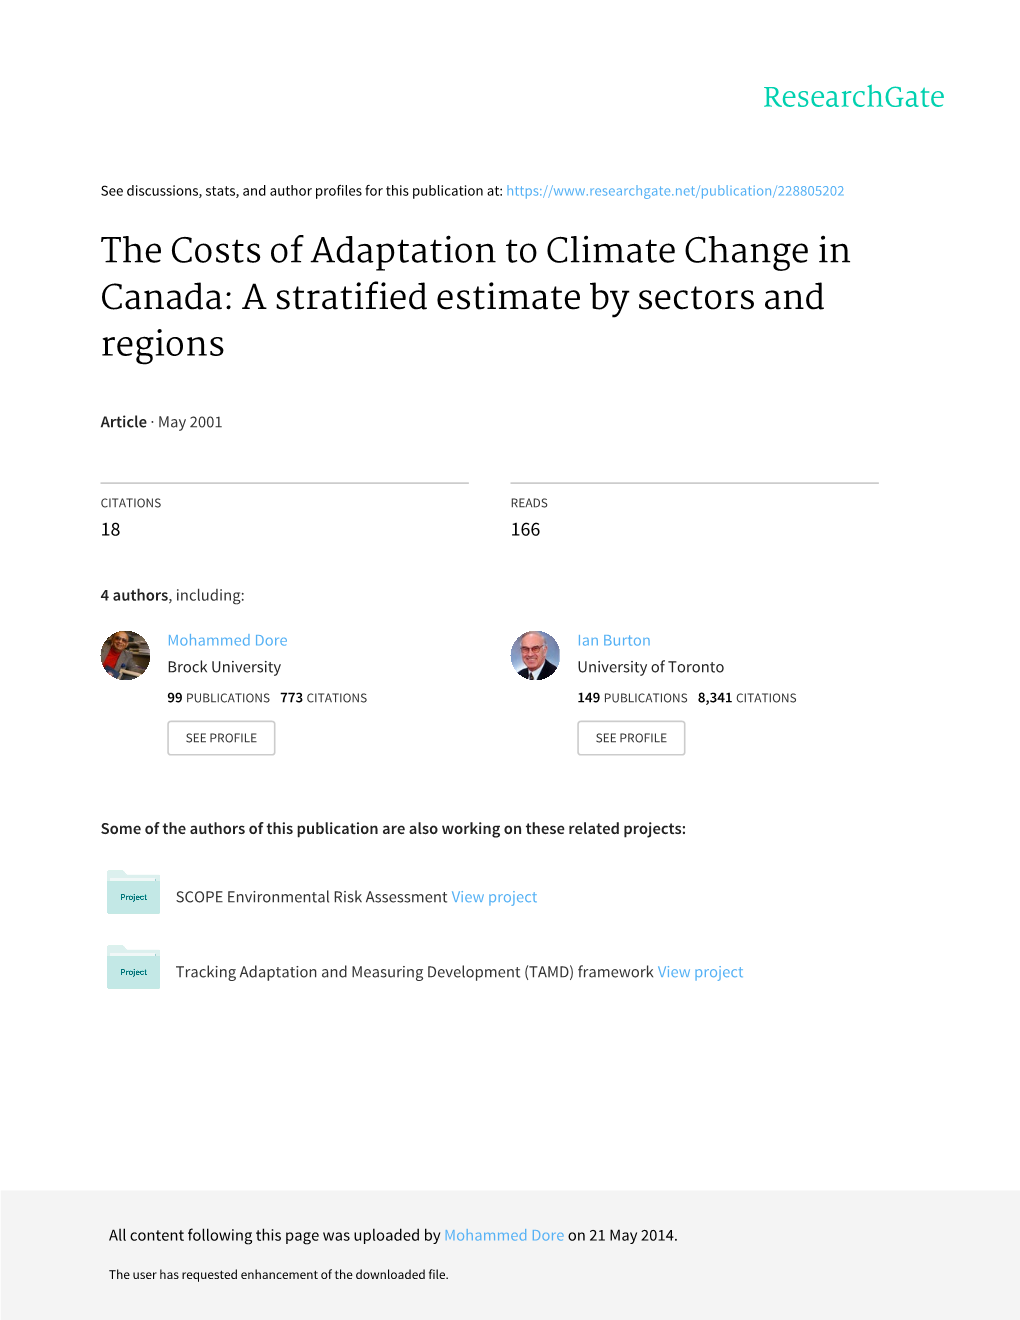 The Costs of Adaptation to Climate Change in Canada: a Stratified Estimate by Sectors and Regions